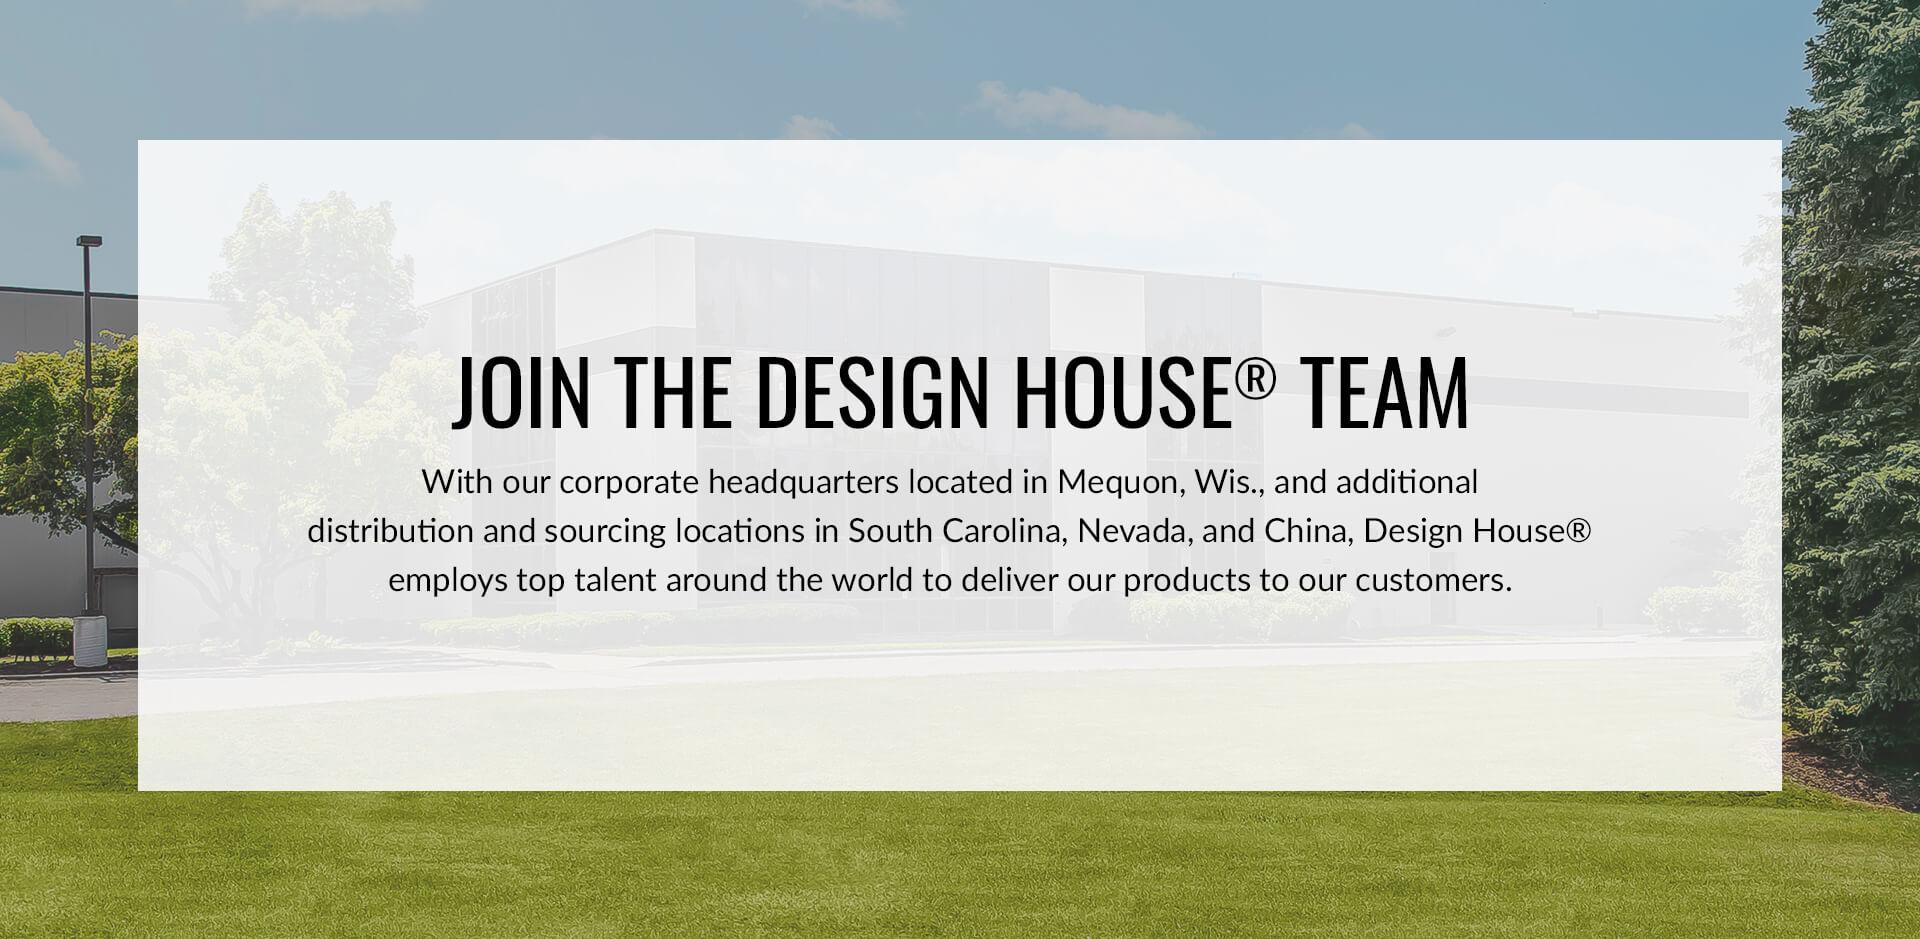 Join the Design House Team. With our corporate headquarters located in Mequon, Wis., and additional distribution and sourcing locations in South Carolina, Nevada, and China, Design House employs top talent around the world to deliver our products to customers.